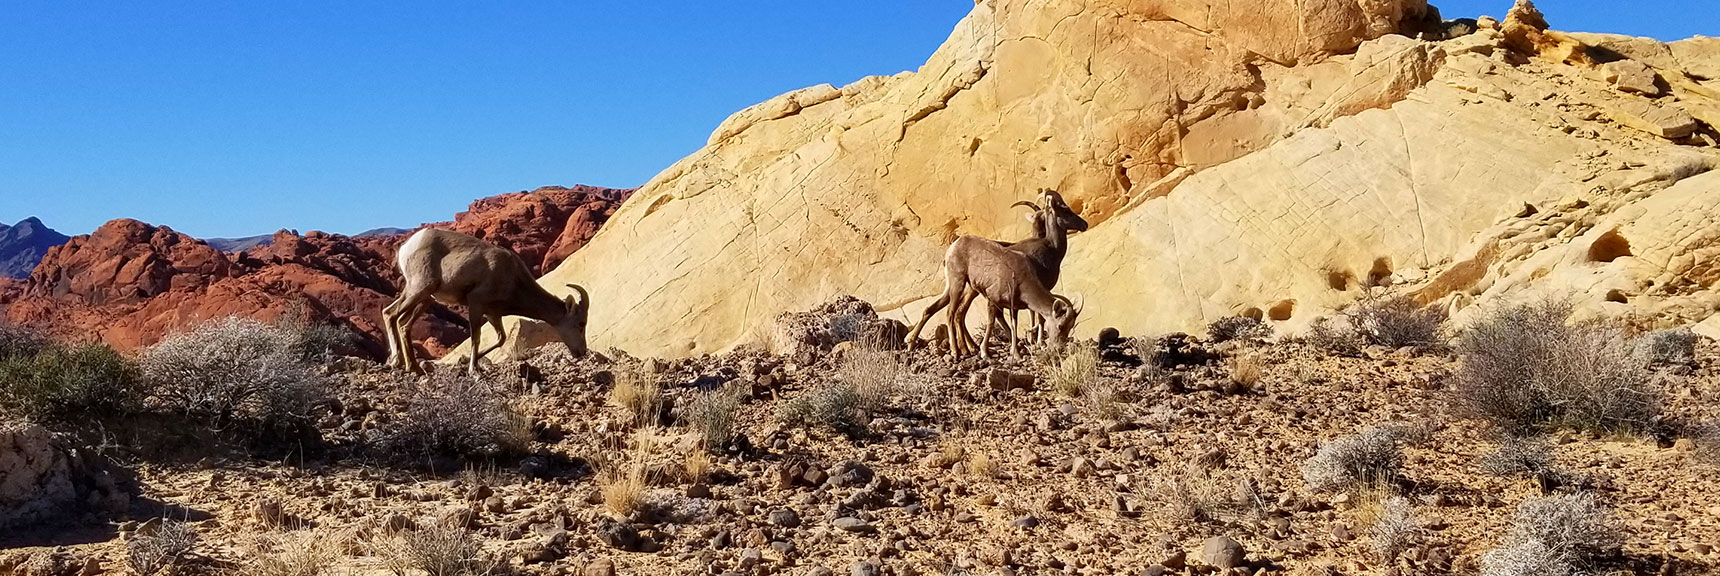 Bighorn Sheep at Silica Dome In Valley of Fire State Park, Nevada Slide 001